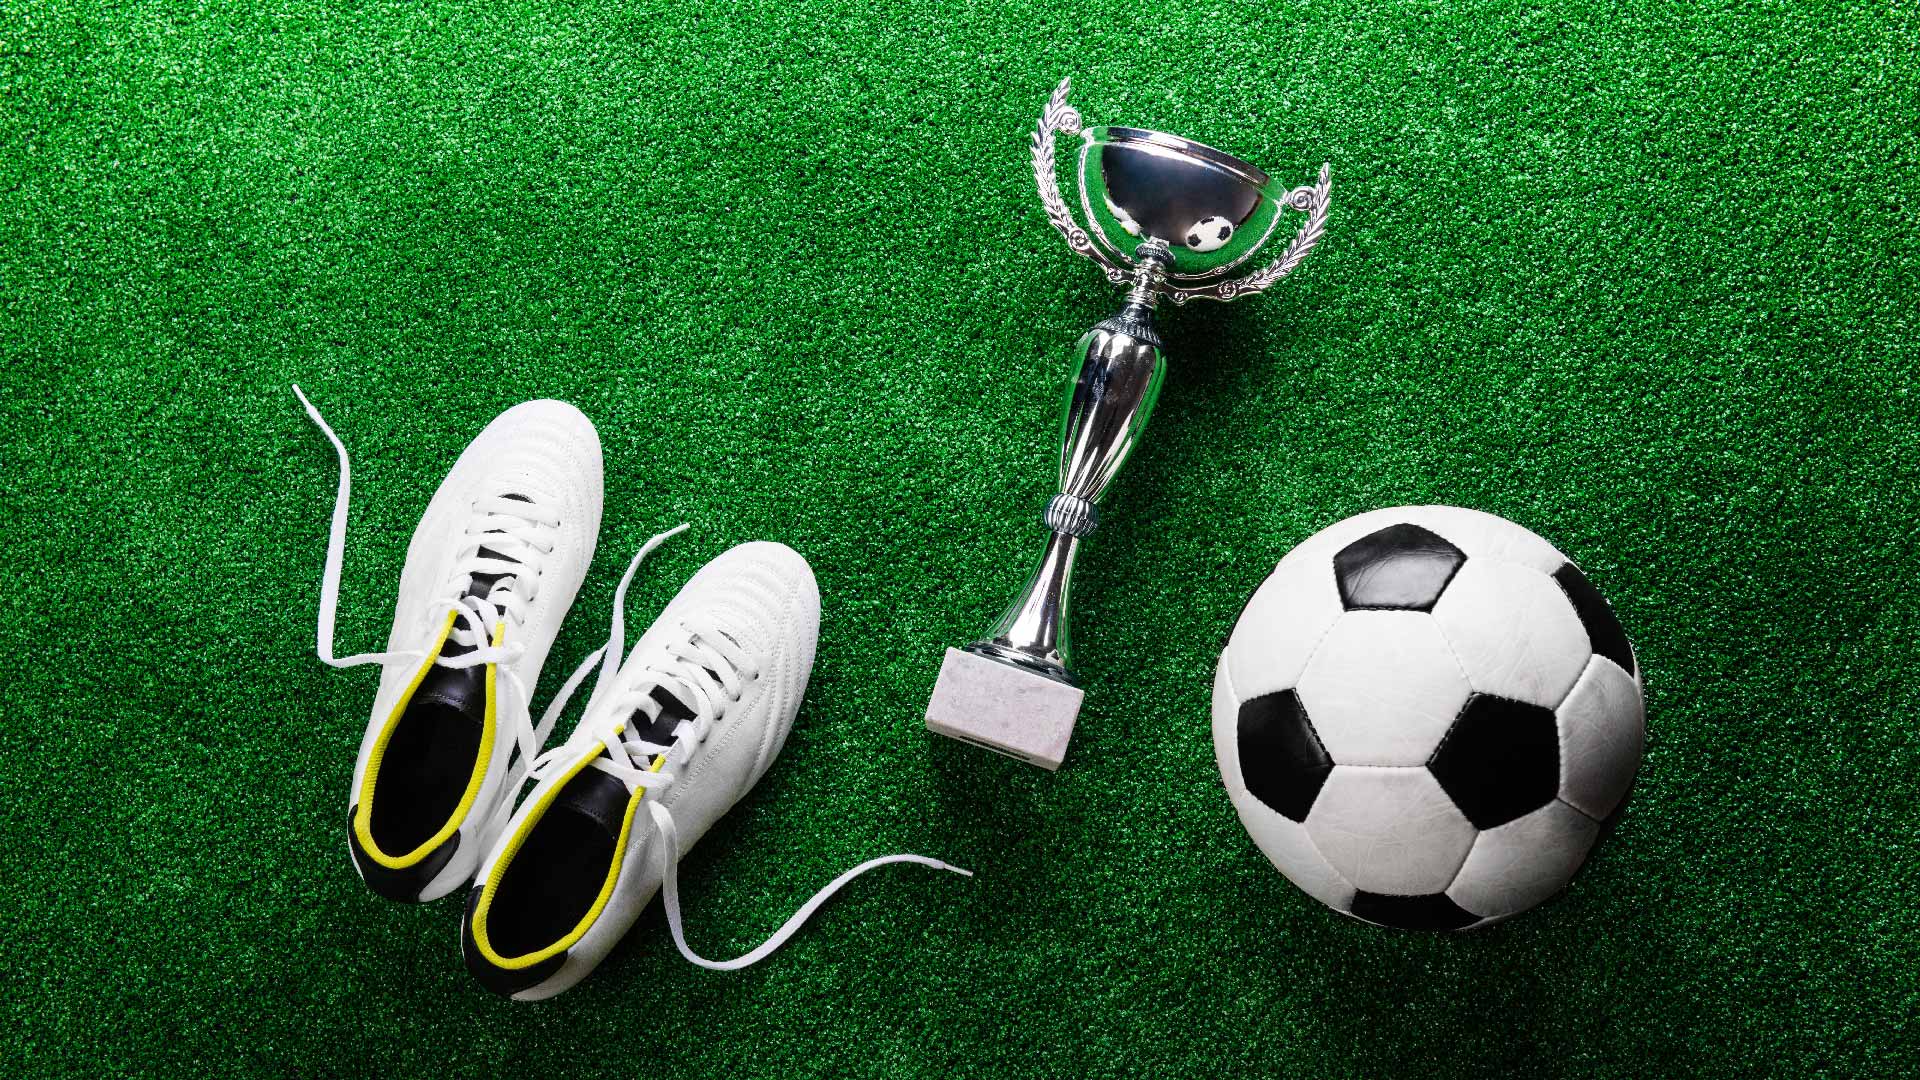 Football boots, a trophy and a football